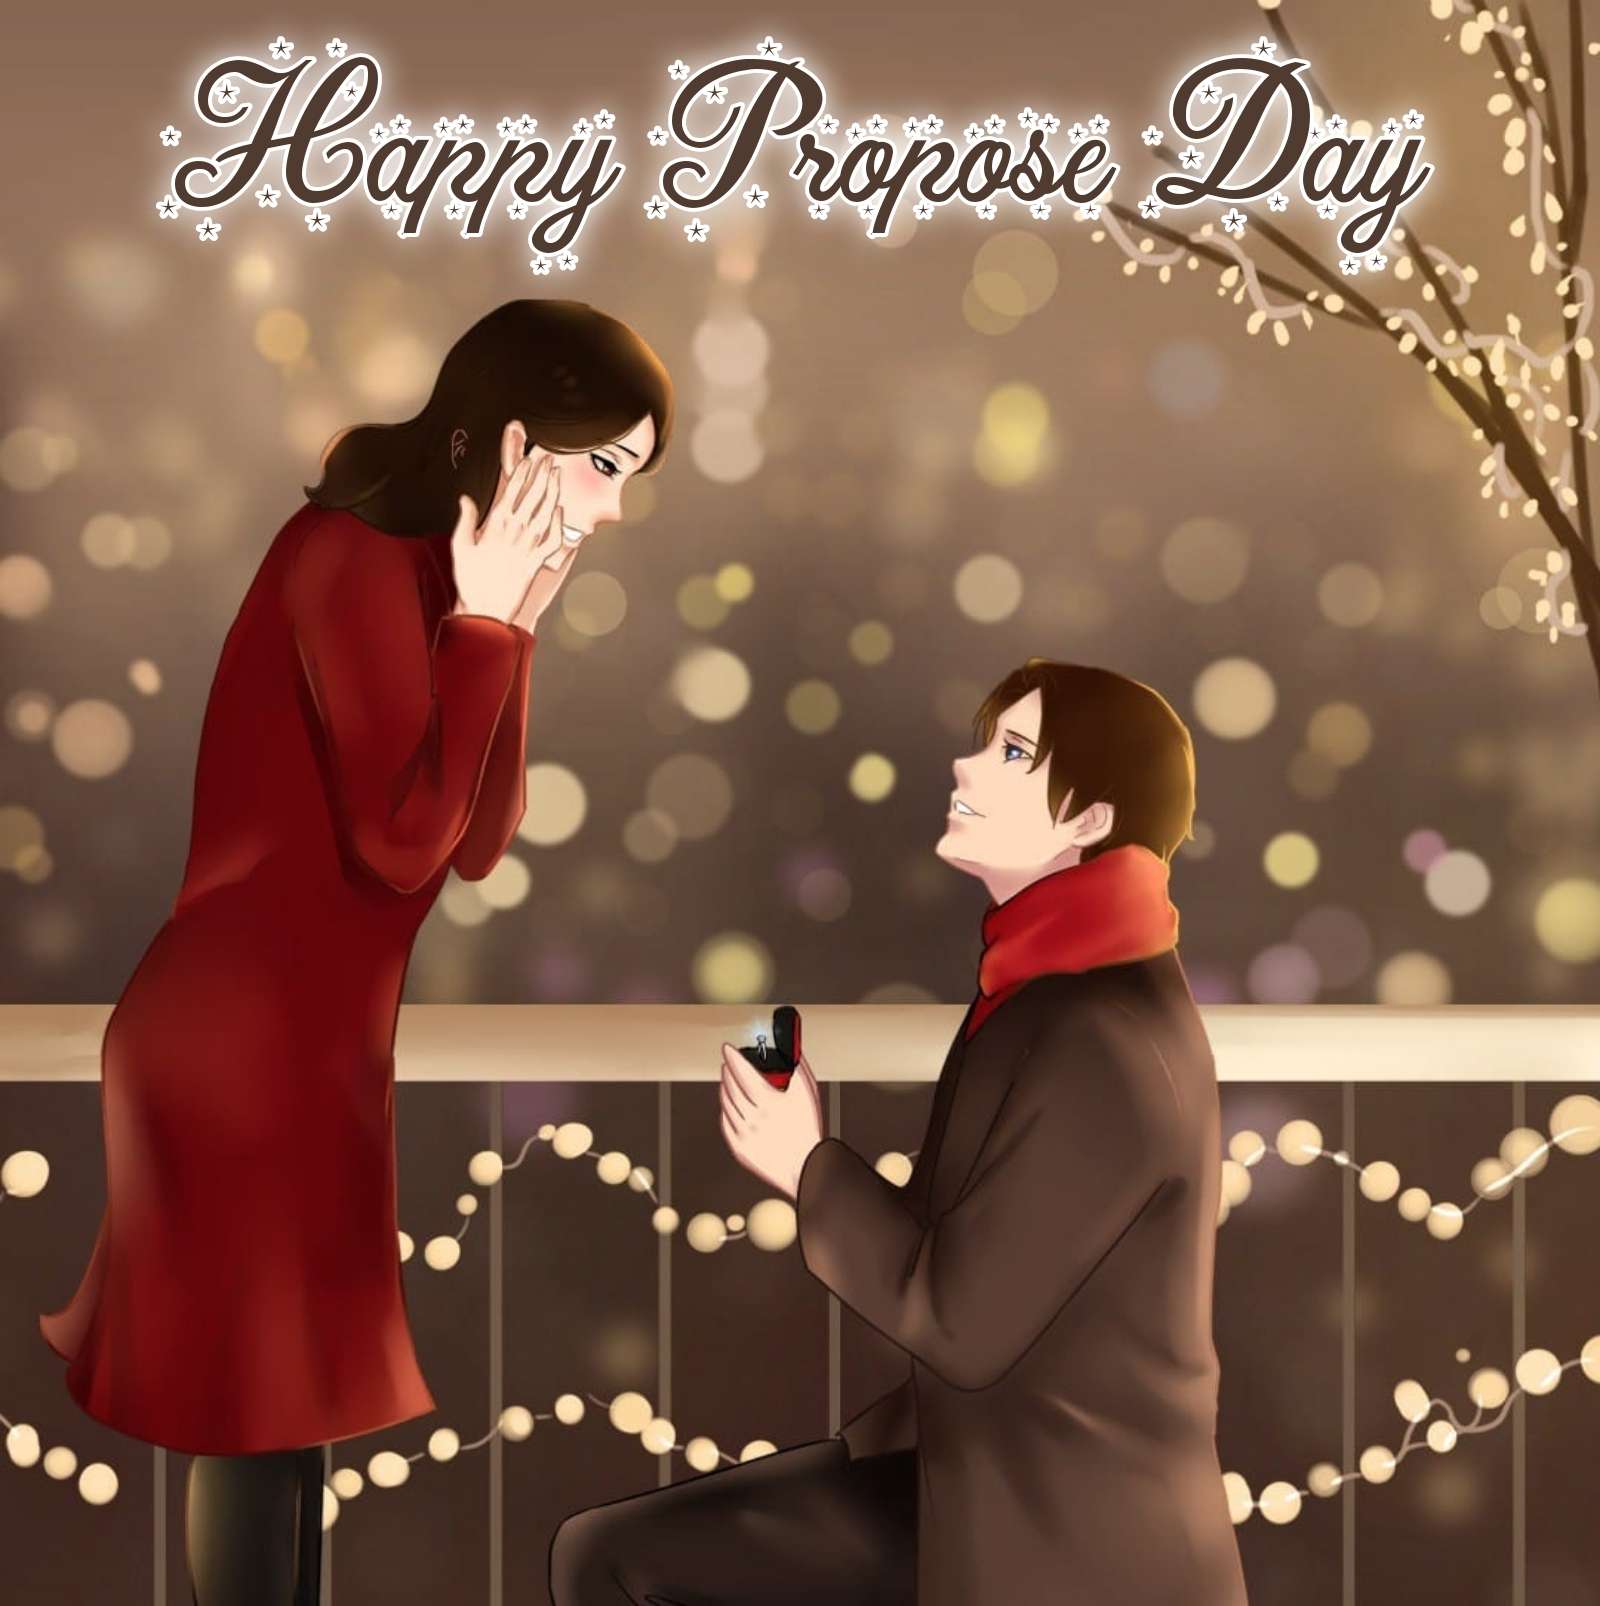 Propose Day Images For Husband Download